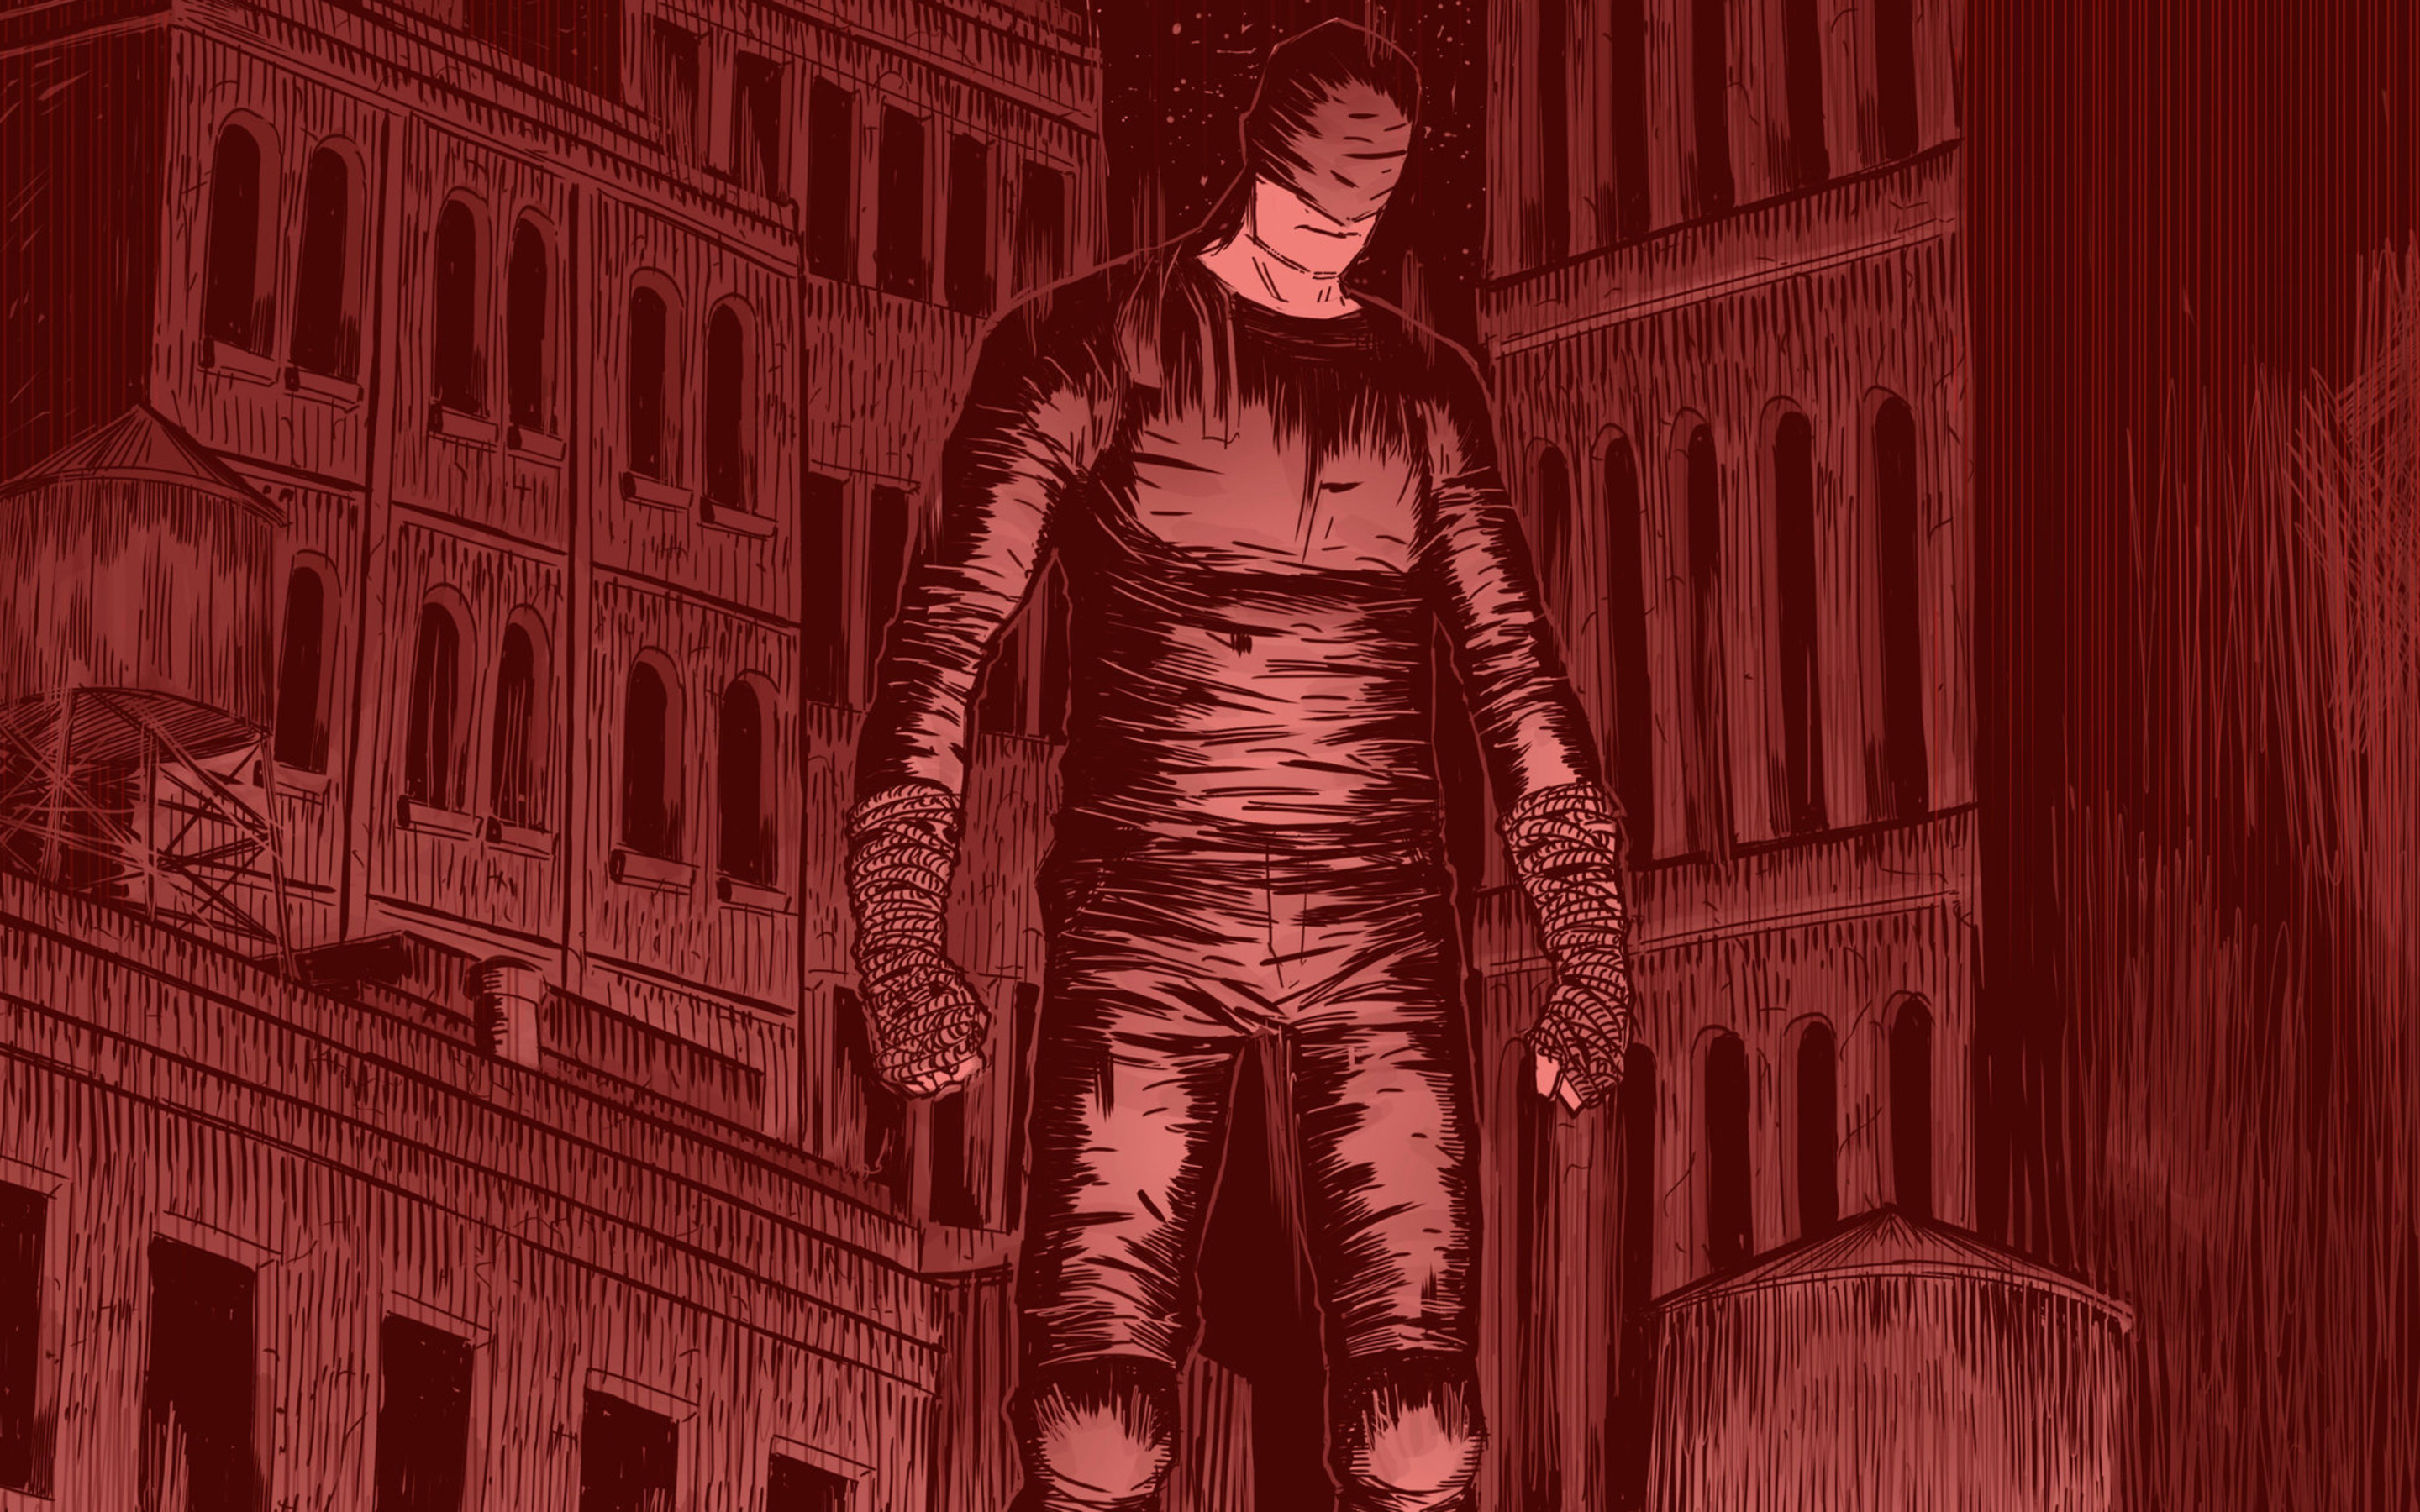 Daredevil I Can See In 2880x1800 Resolution. daredevil-i-can-see-5c.jpg. 